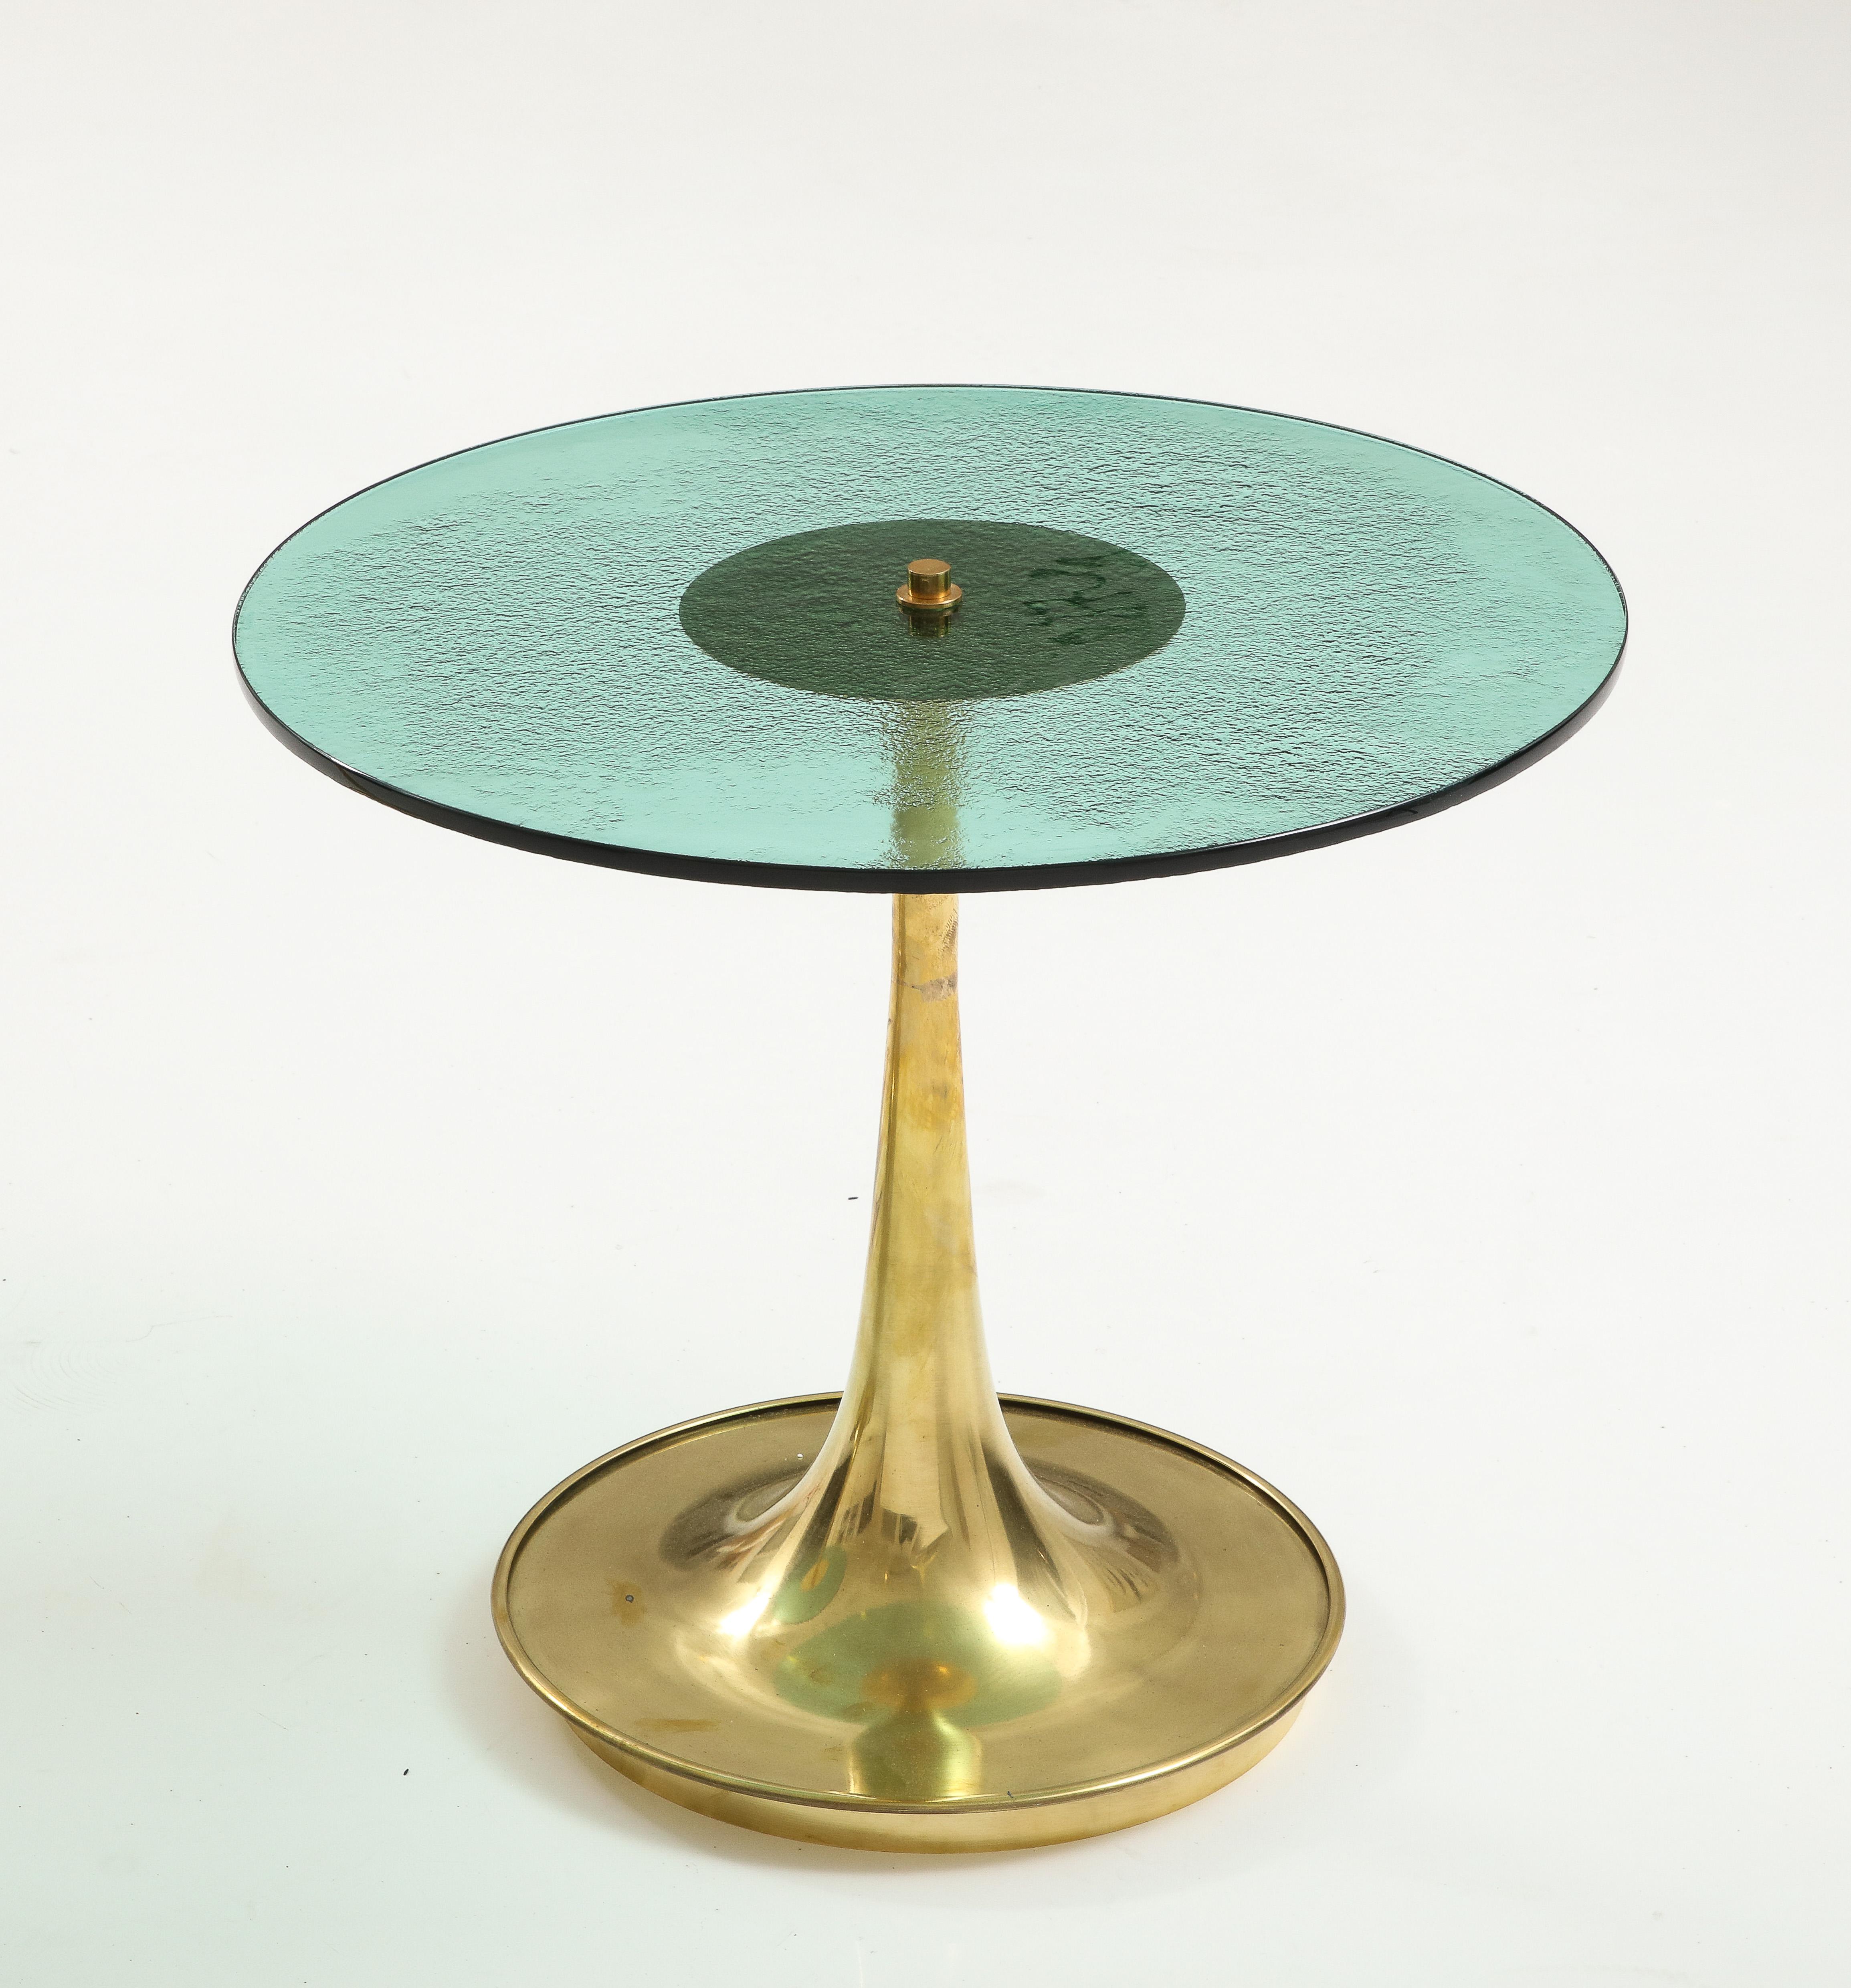 Single Round Soft Green Murano Glass and Brass Martini or Side Table, Italy, 2023. Hand-casted 12 mm Soft Green colored Murano round glass top sits atop a hand-turned, trumpet-shaped brass base. The glass top is smooth and flat on one side and